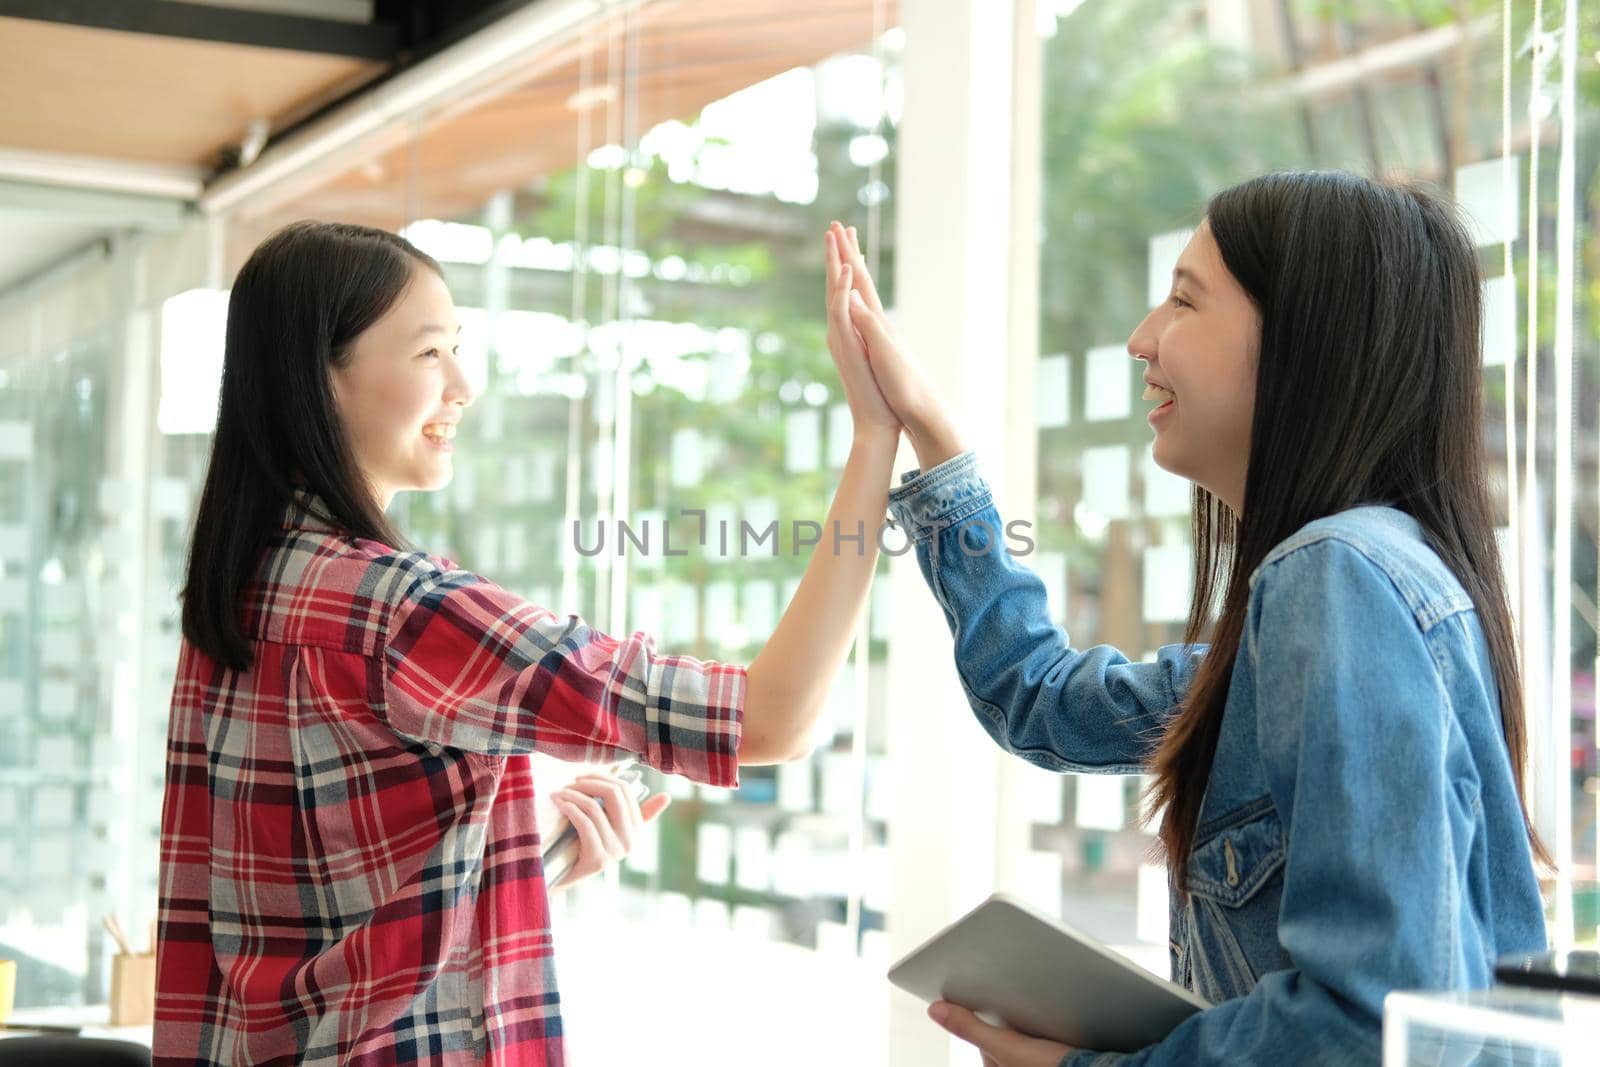 girl teenager giving high five touching hands together. teamwork friendship amity concept